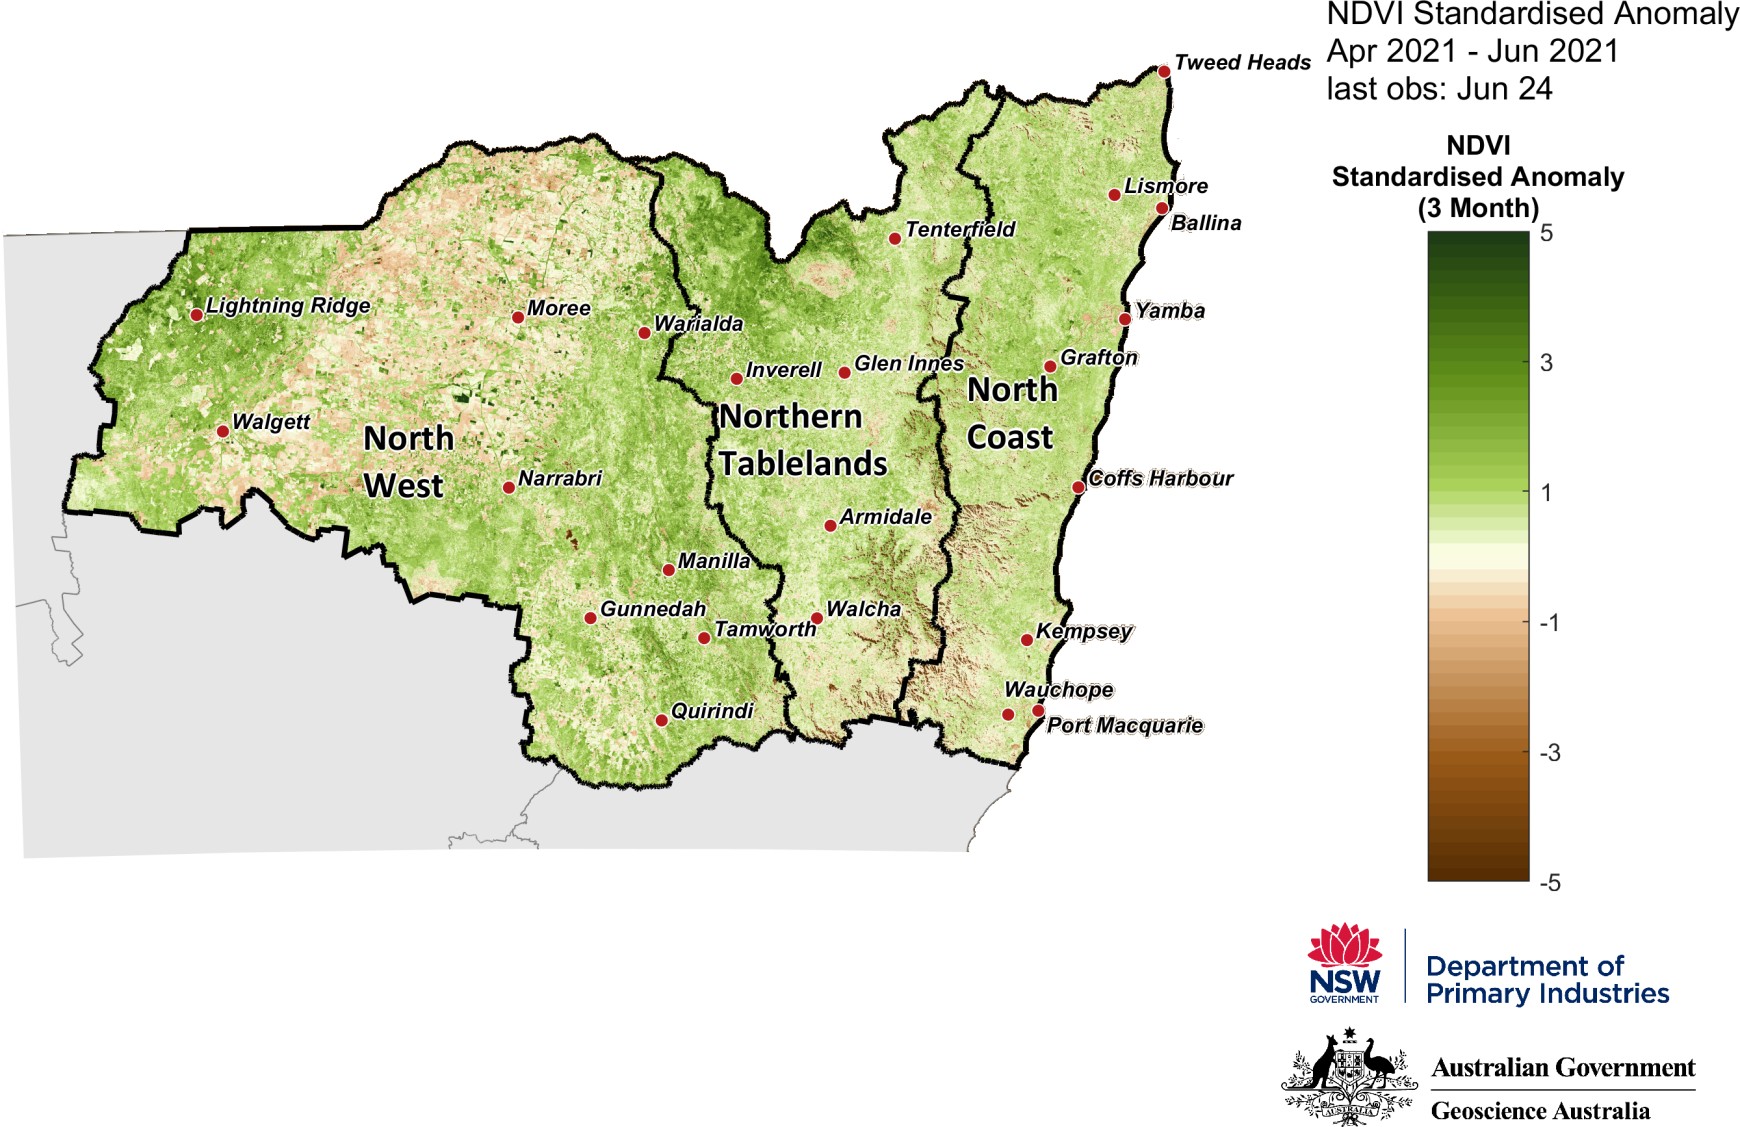 Combined Drought Indicator for the North West, Northern Tableland and North Coast regions